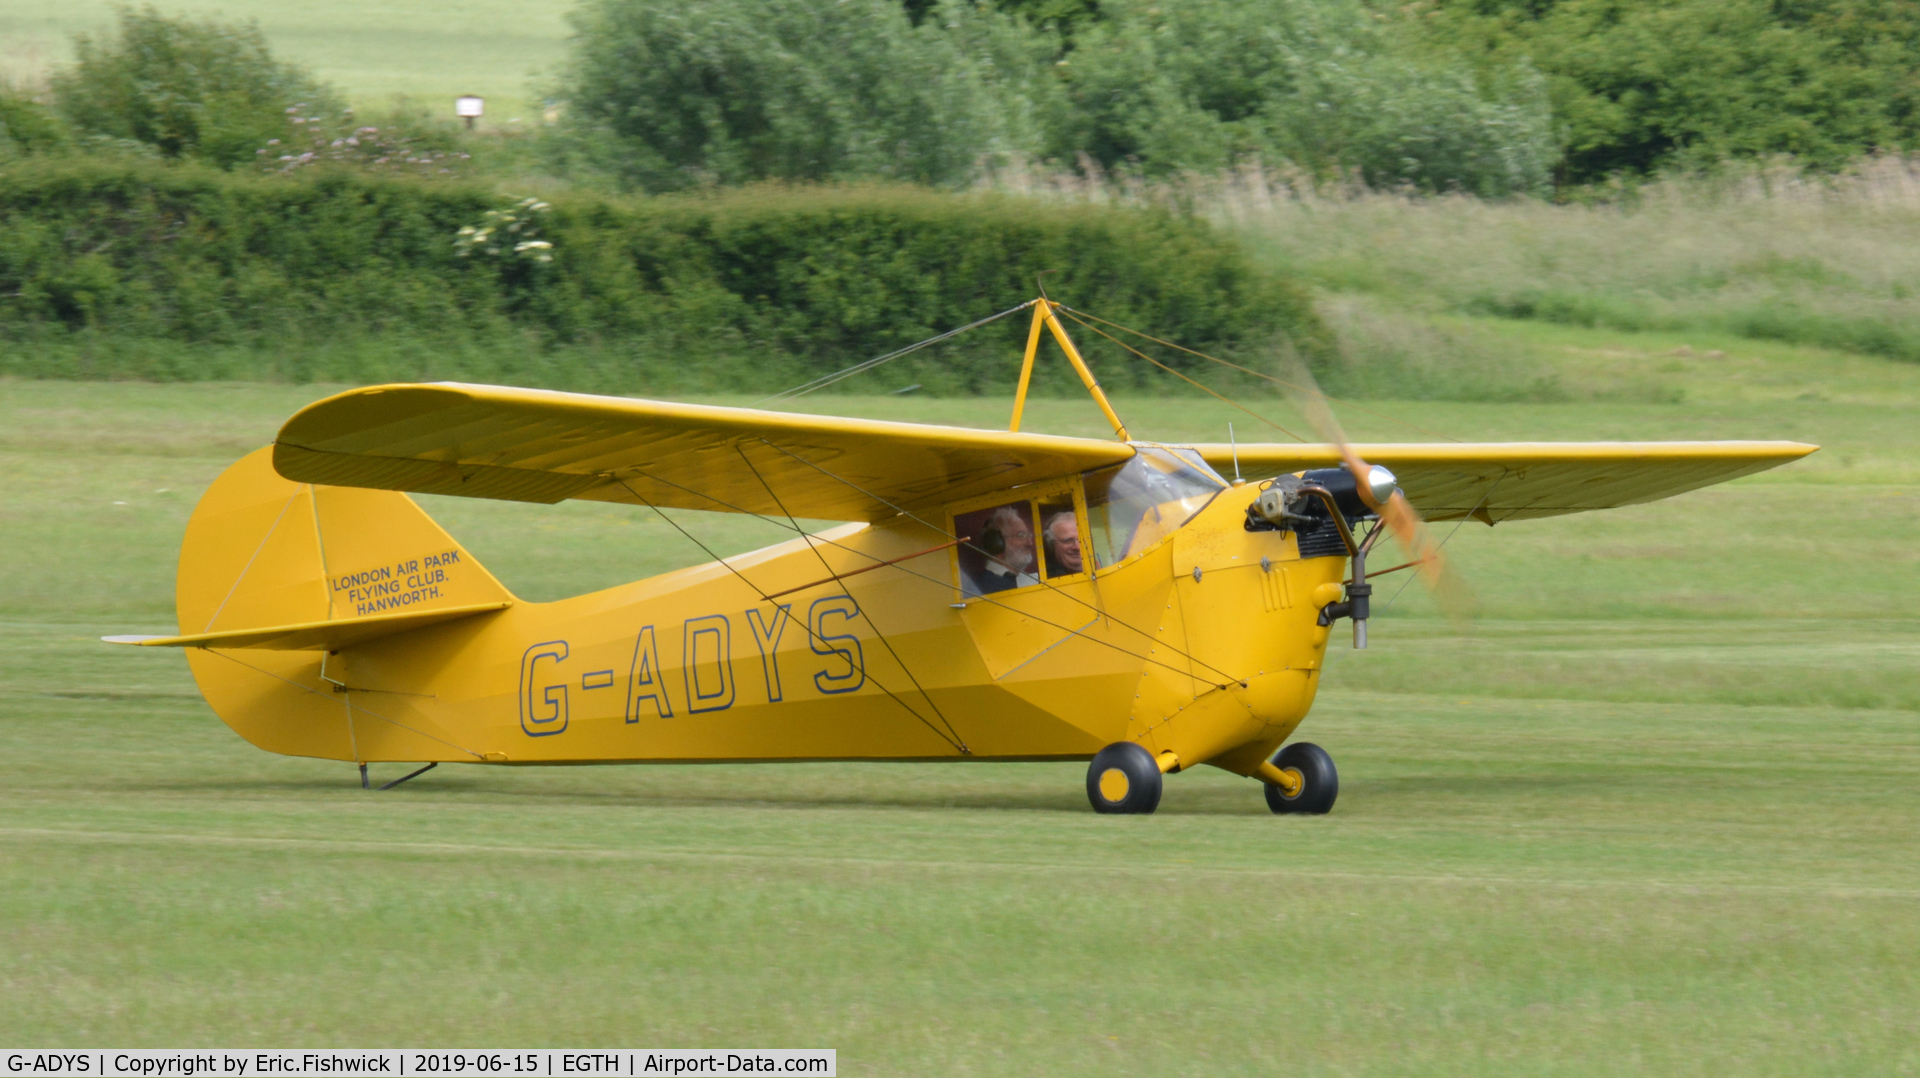 G-ADYS, 1935 Aeronca C-3 C/N A-600, 3. G-ADYS at The Evening Airshow at The Shuttleworth Collection, June, 2019.